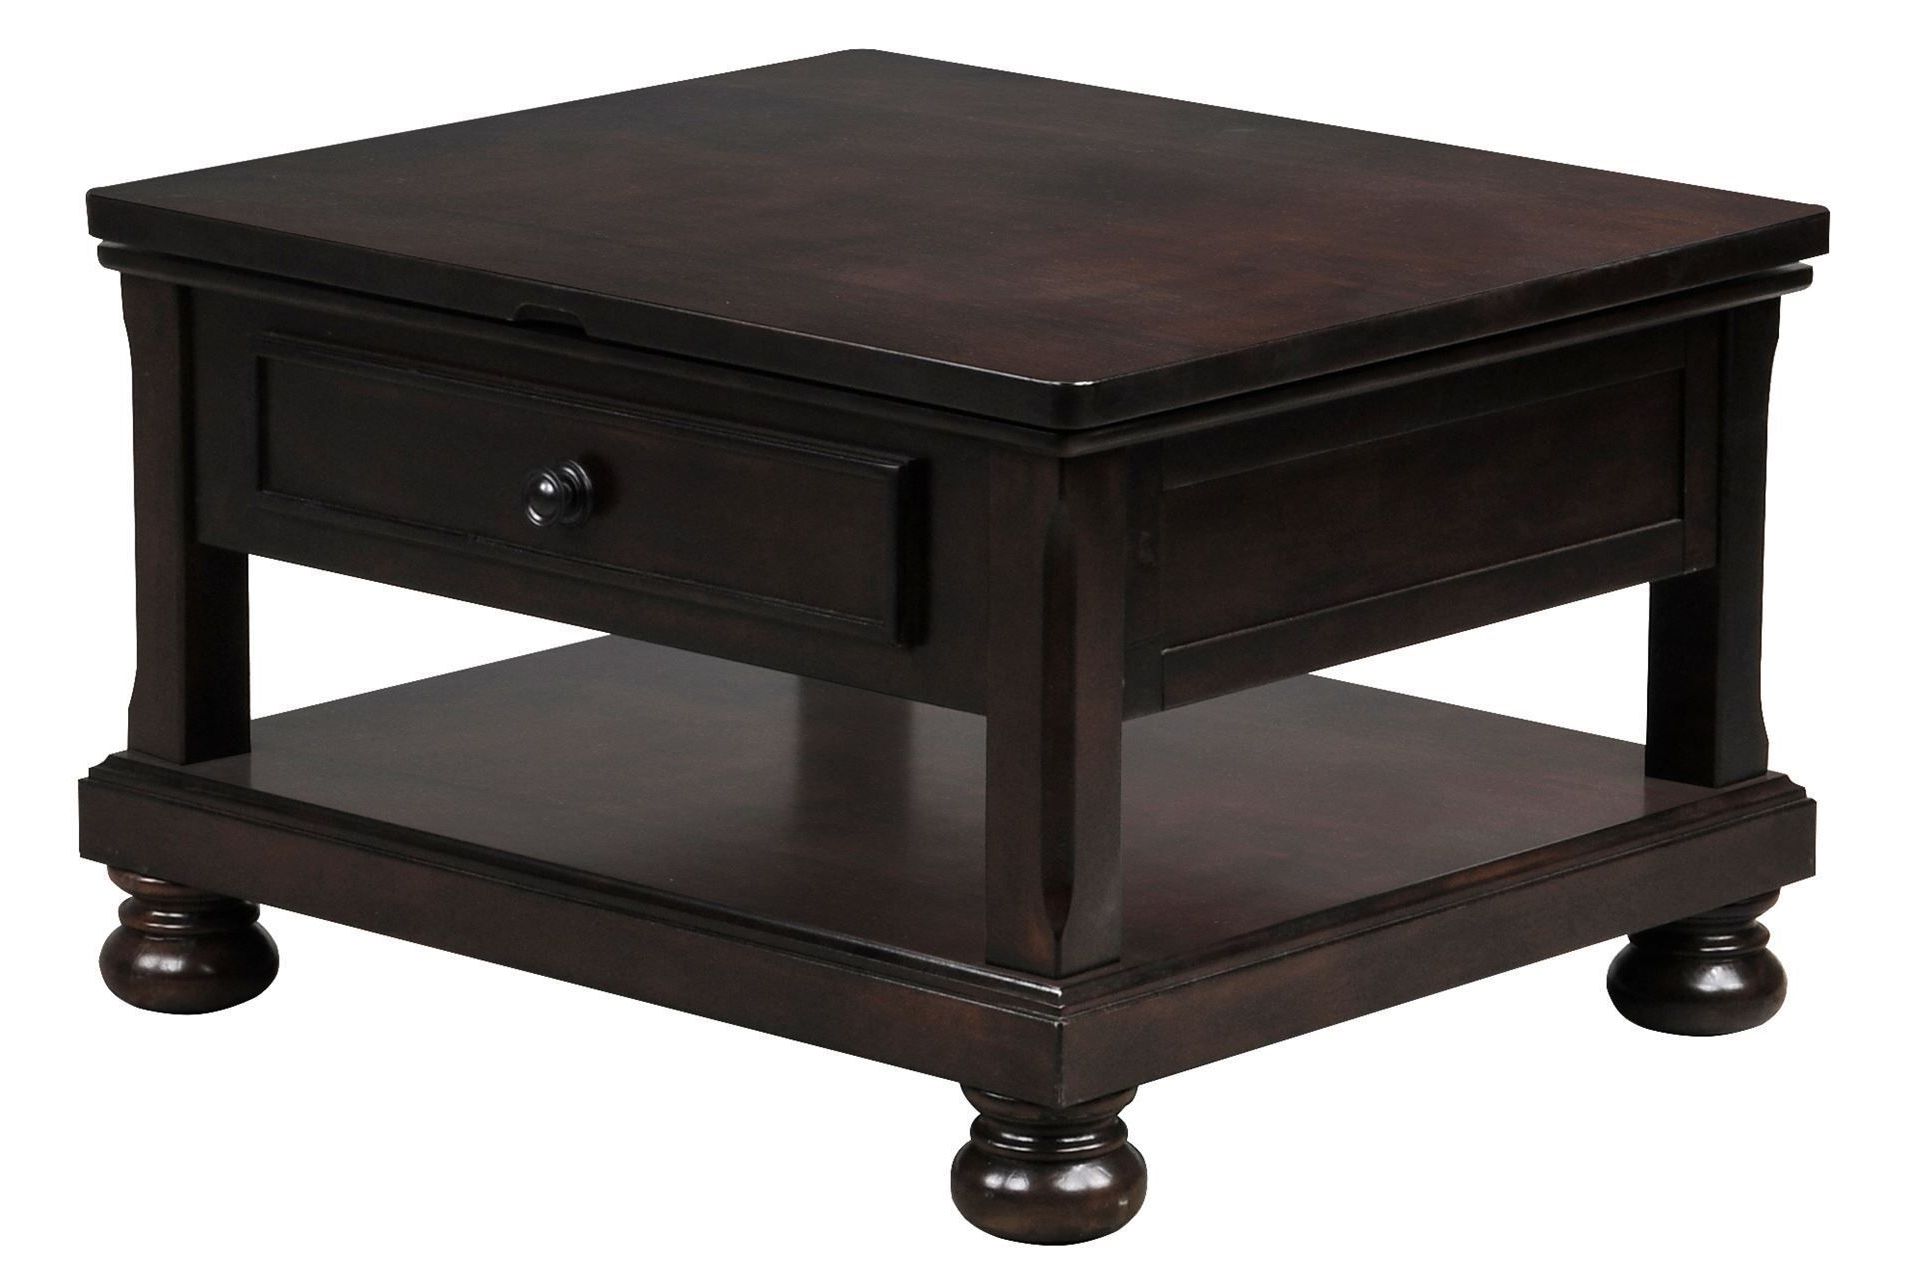 2019 Porter Lift Top Cocktail Table Purchased This From Ashley Furniture Intended For Tillman Rectangle Lift Top Cocktail Tables (View 10 of 20)